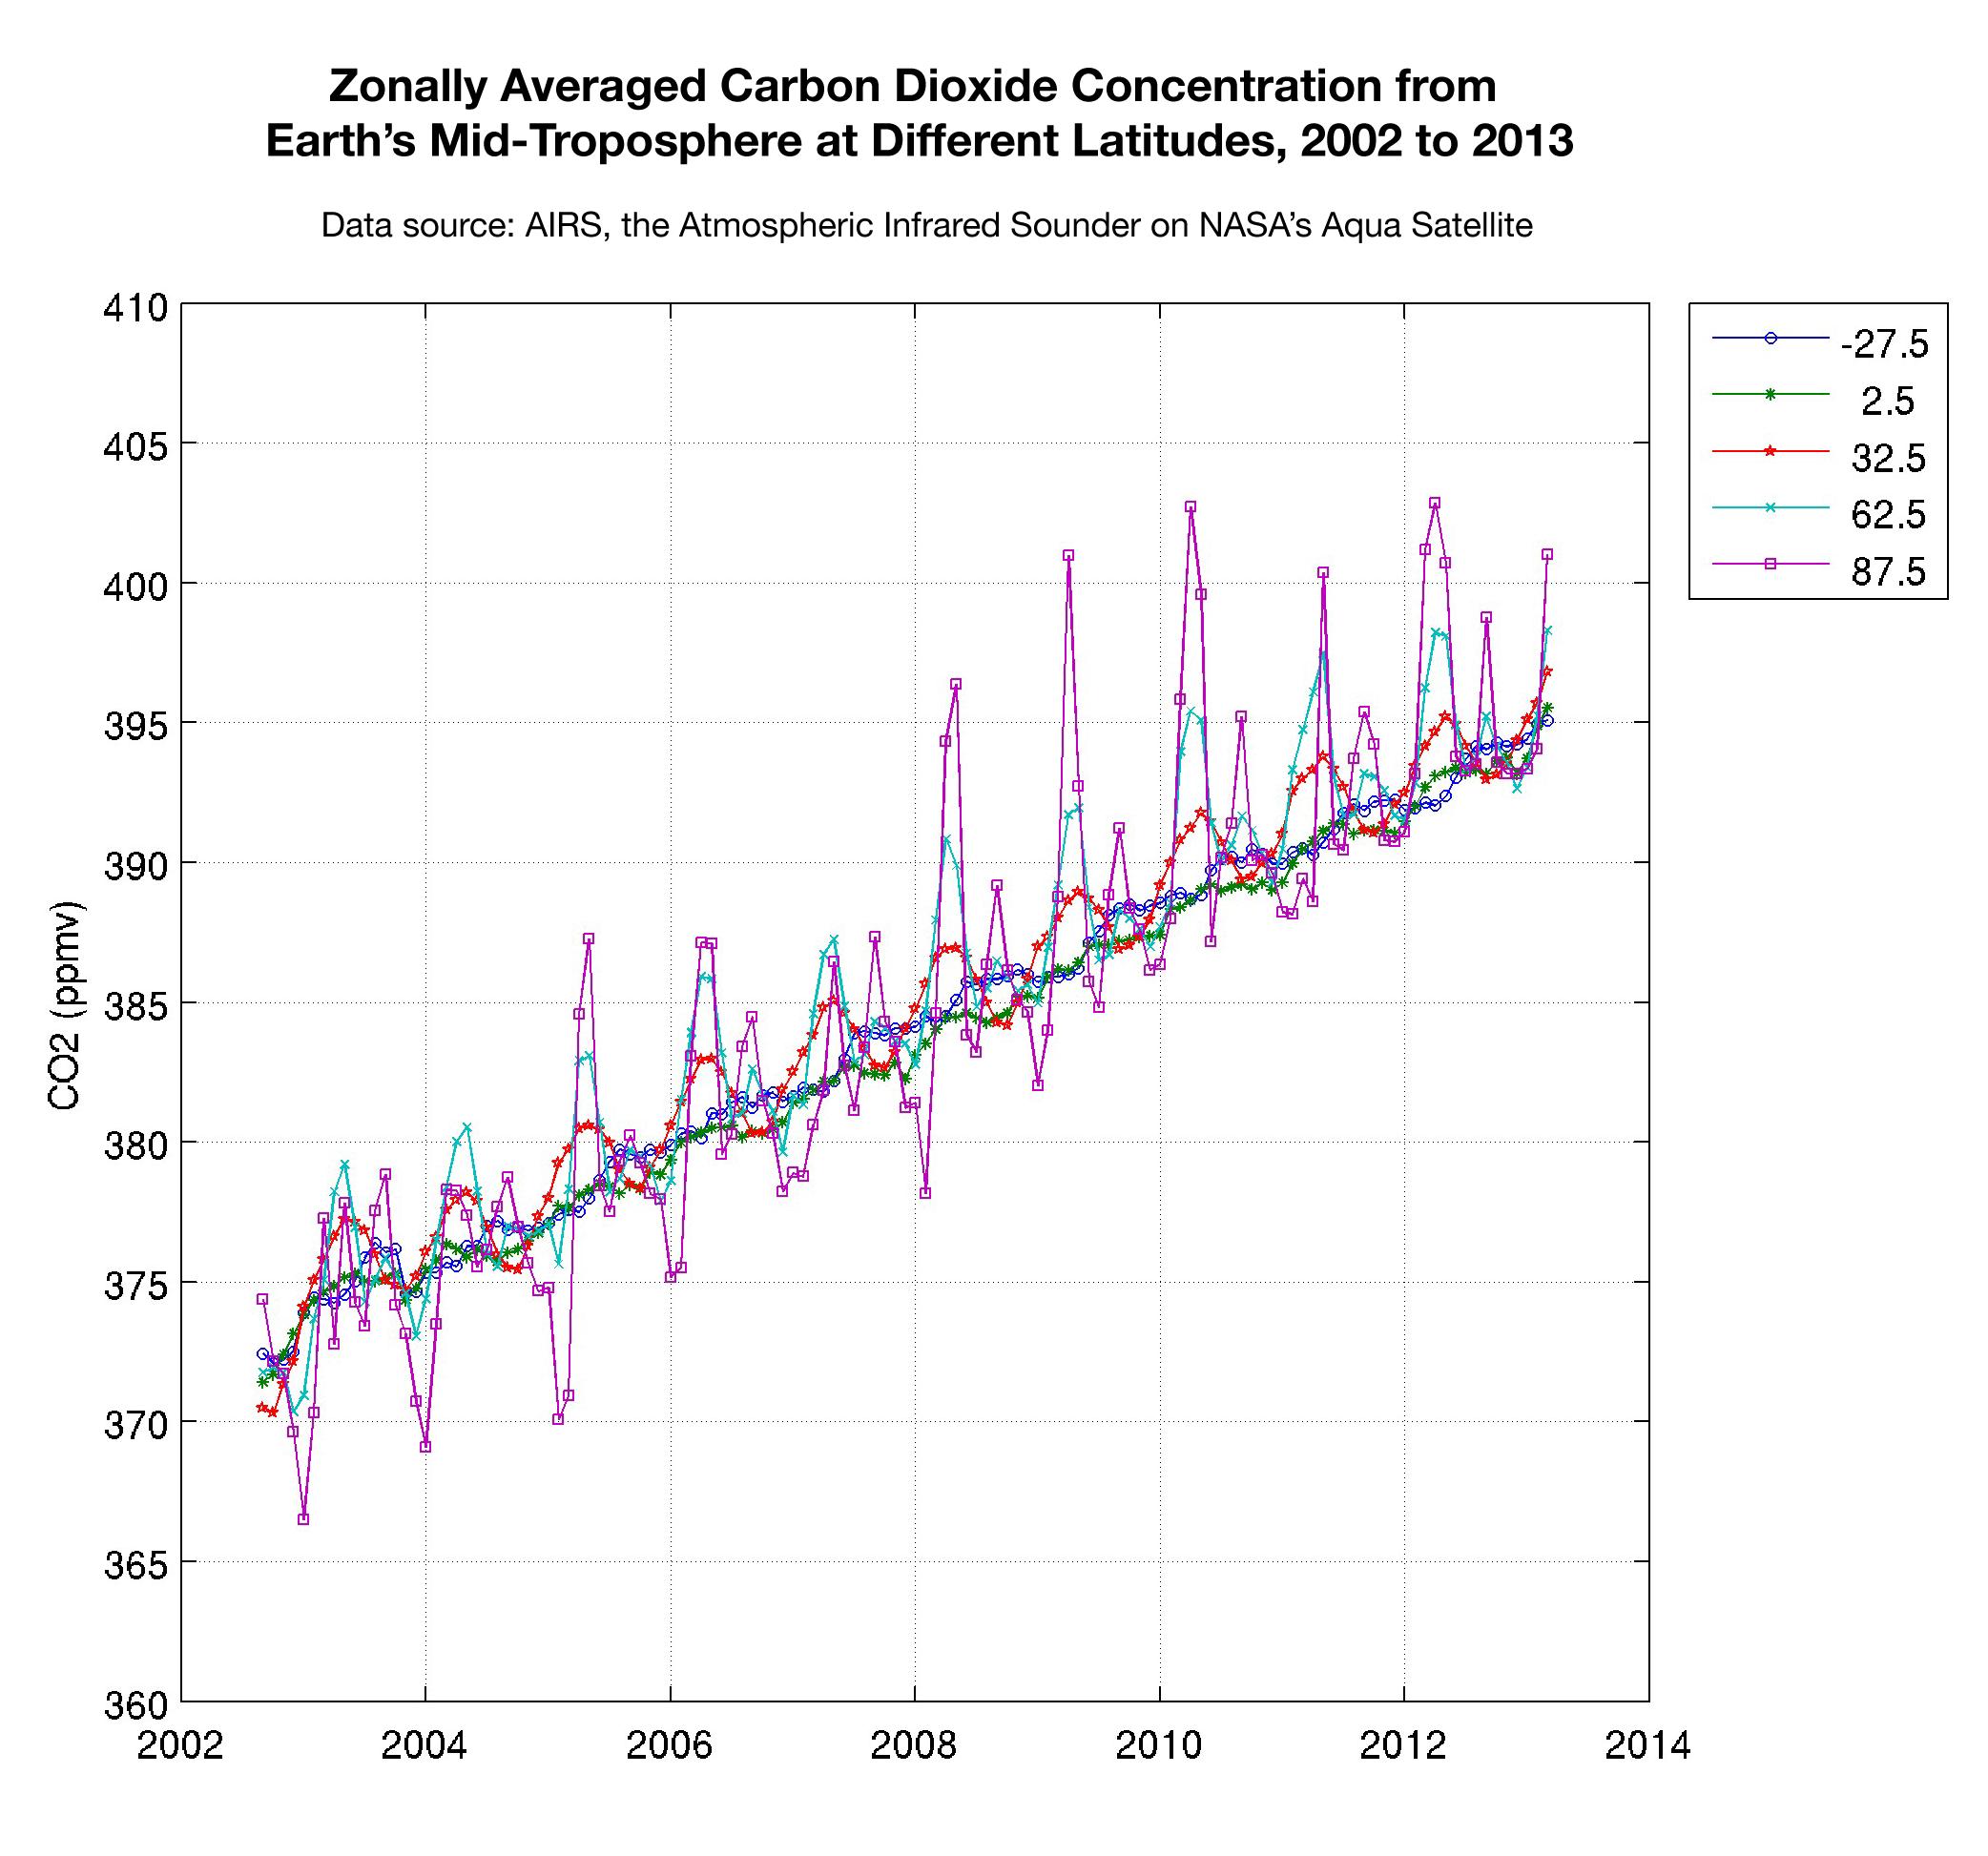 graph of zonally averaged carbon dioxide